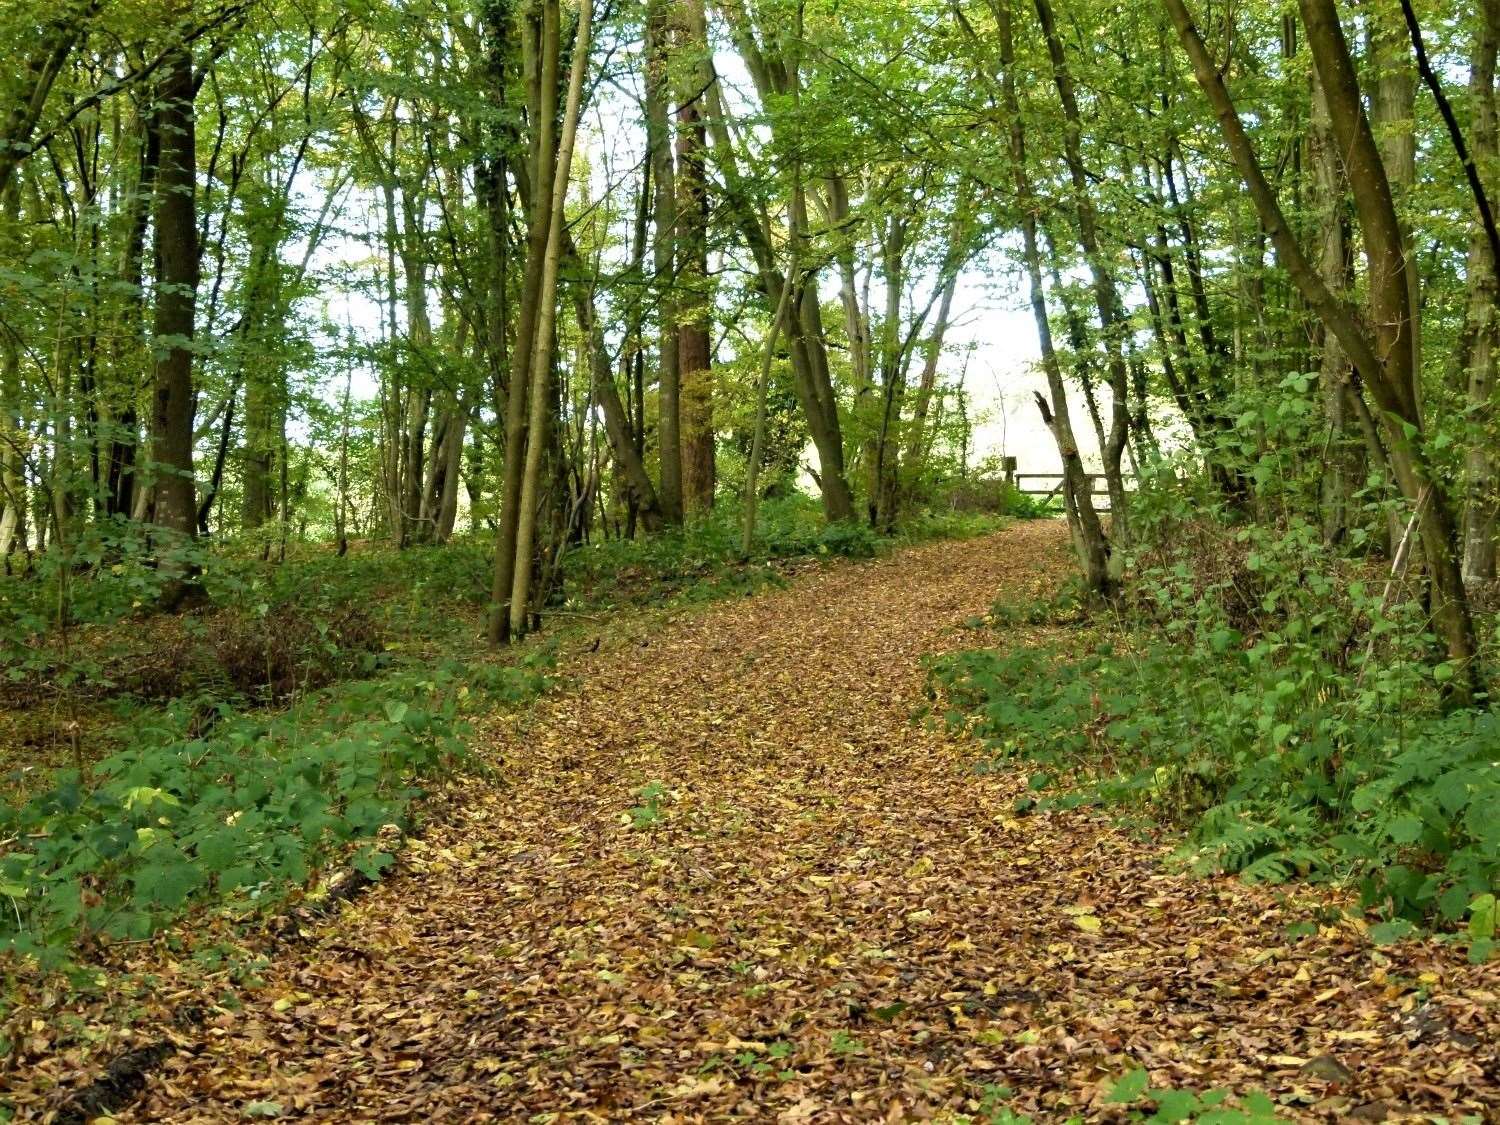 The area of Hoads wood before the trees were chopped down